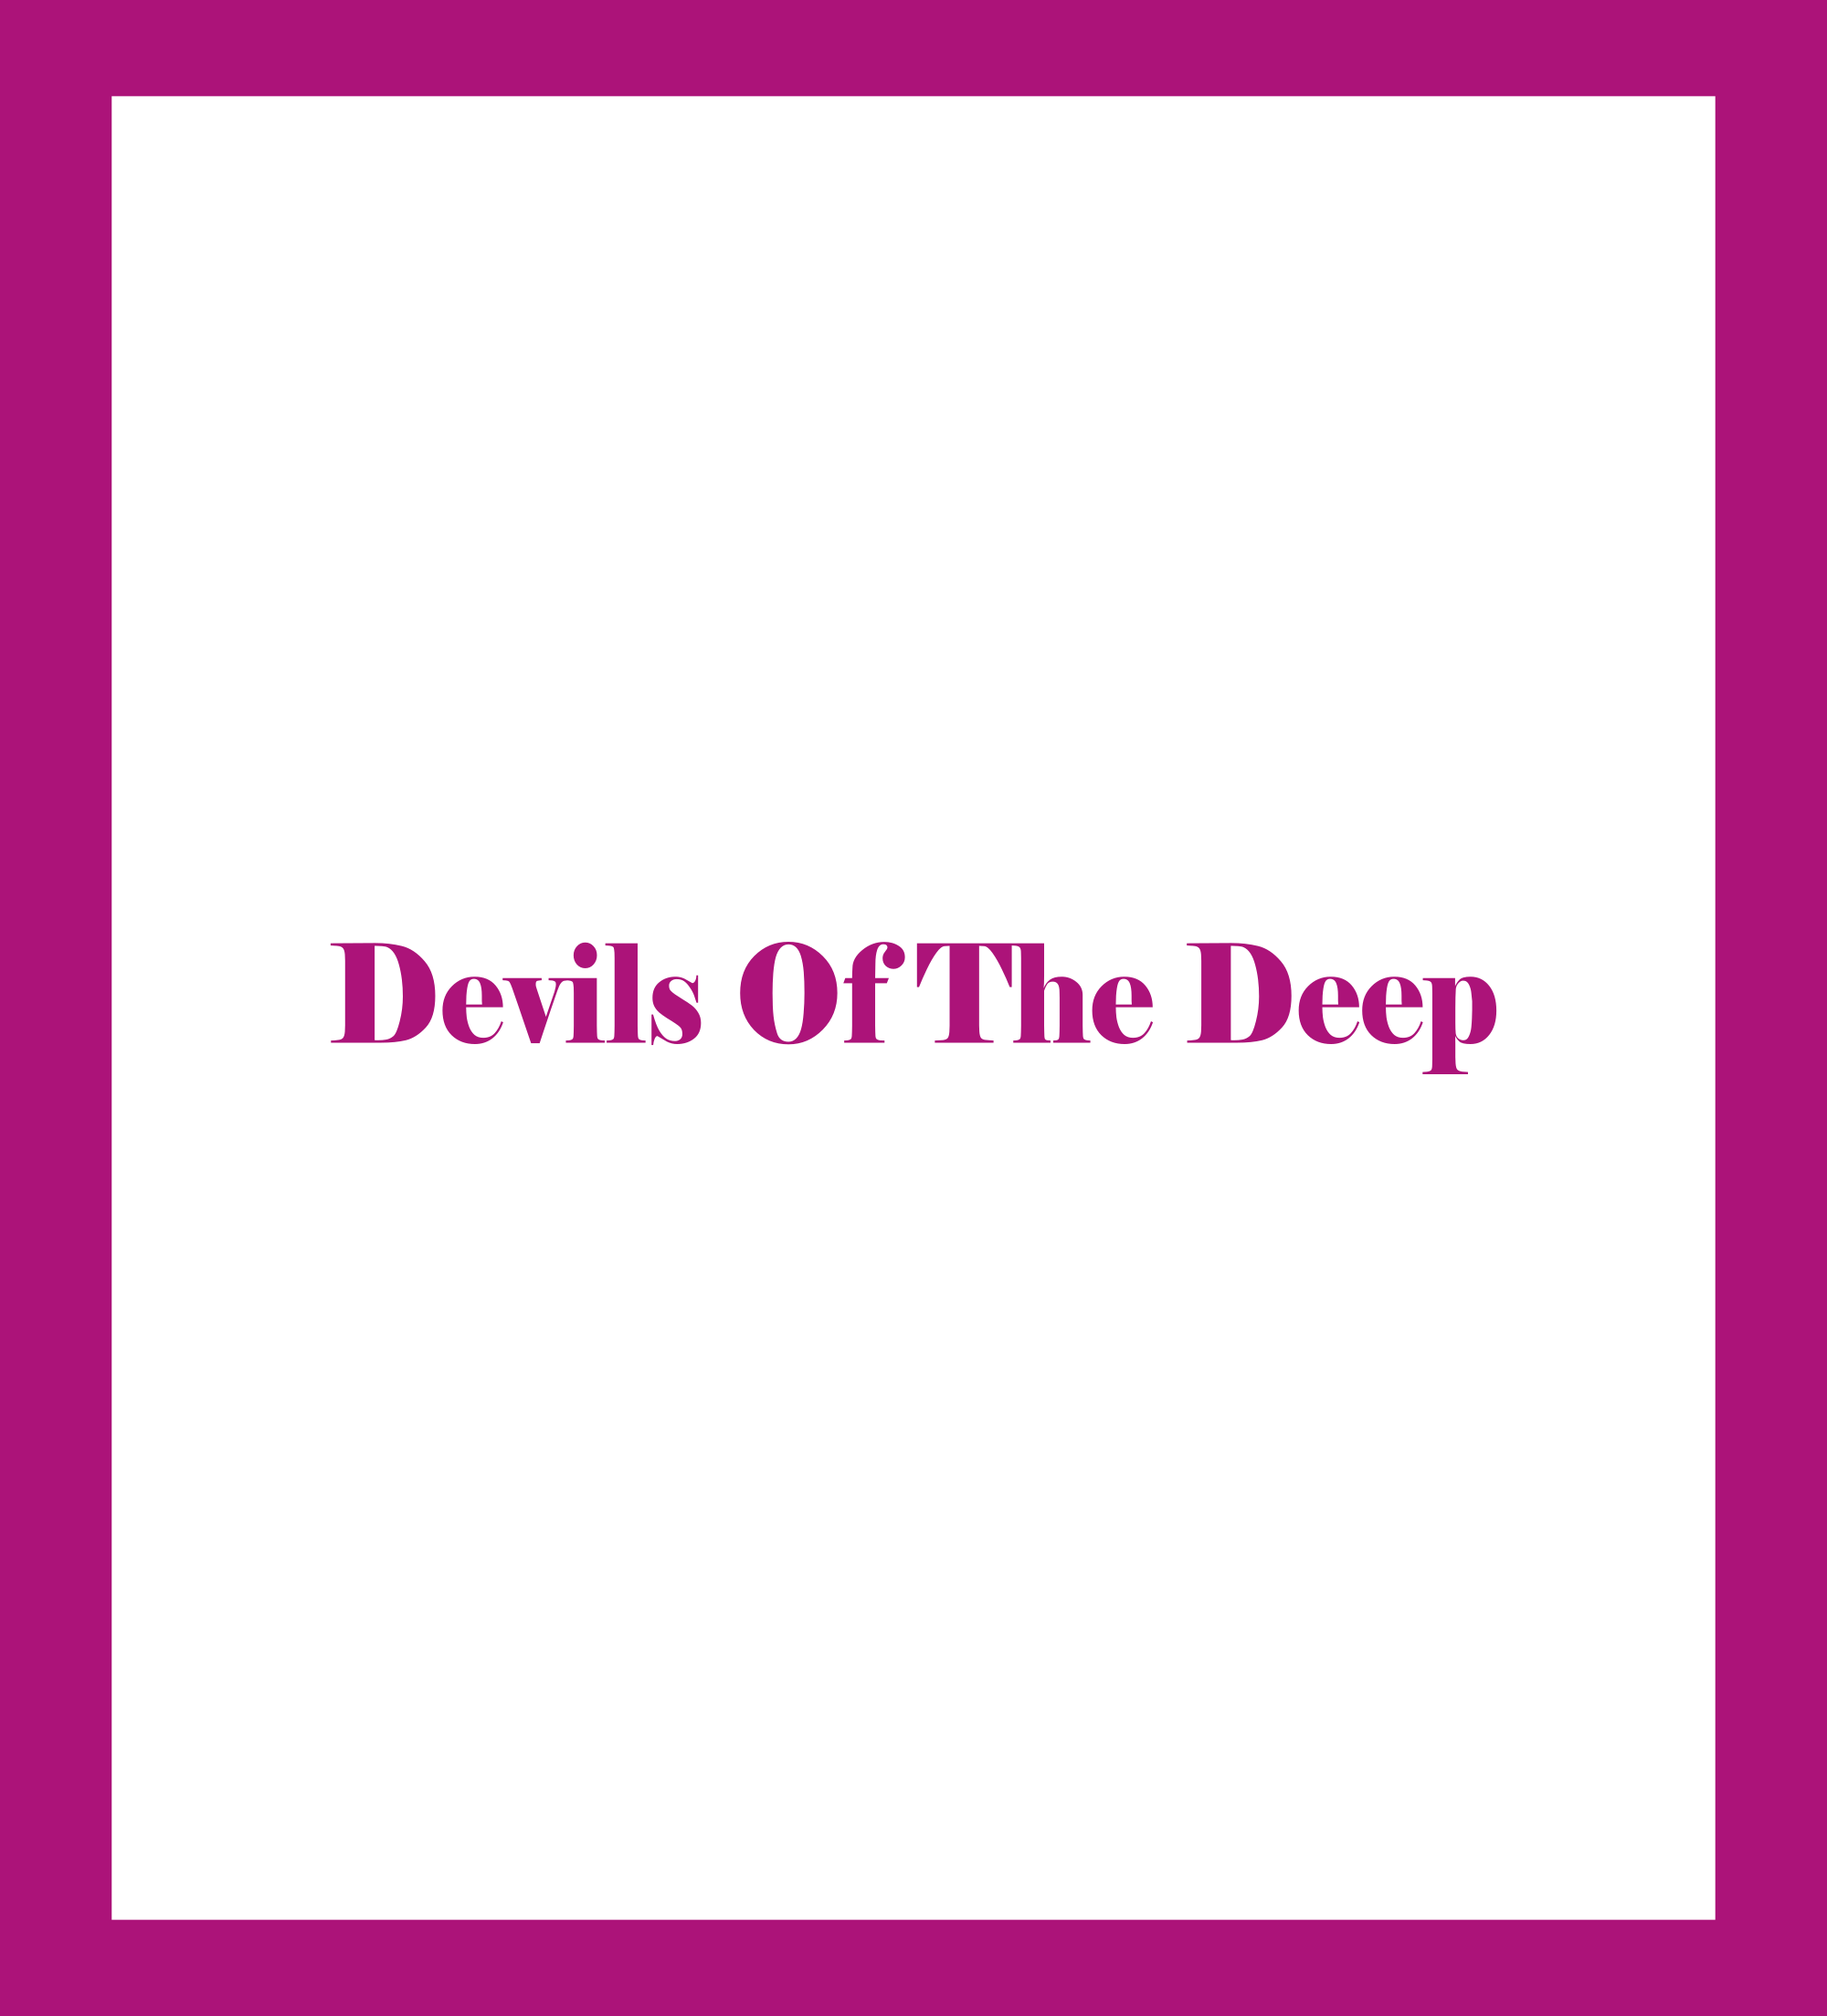 Devils Of The Deep